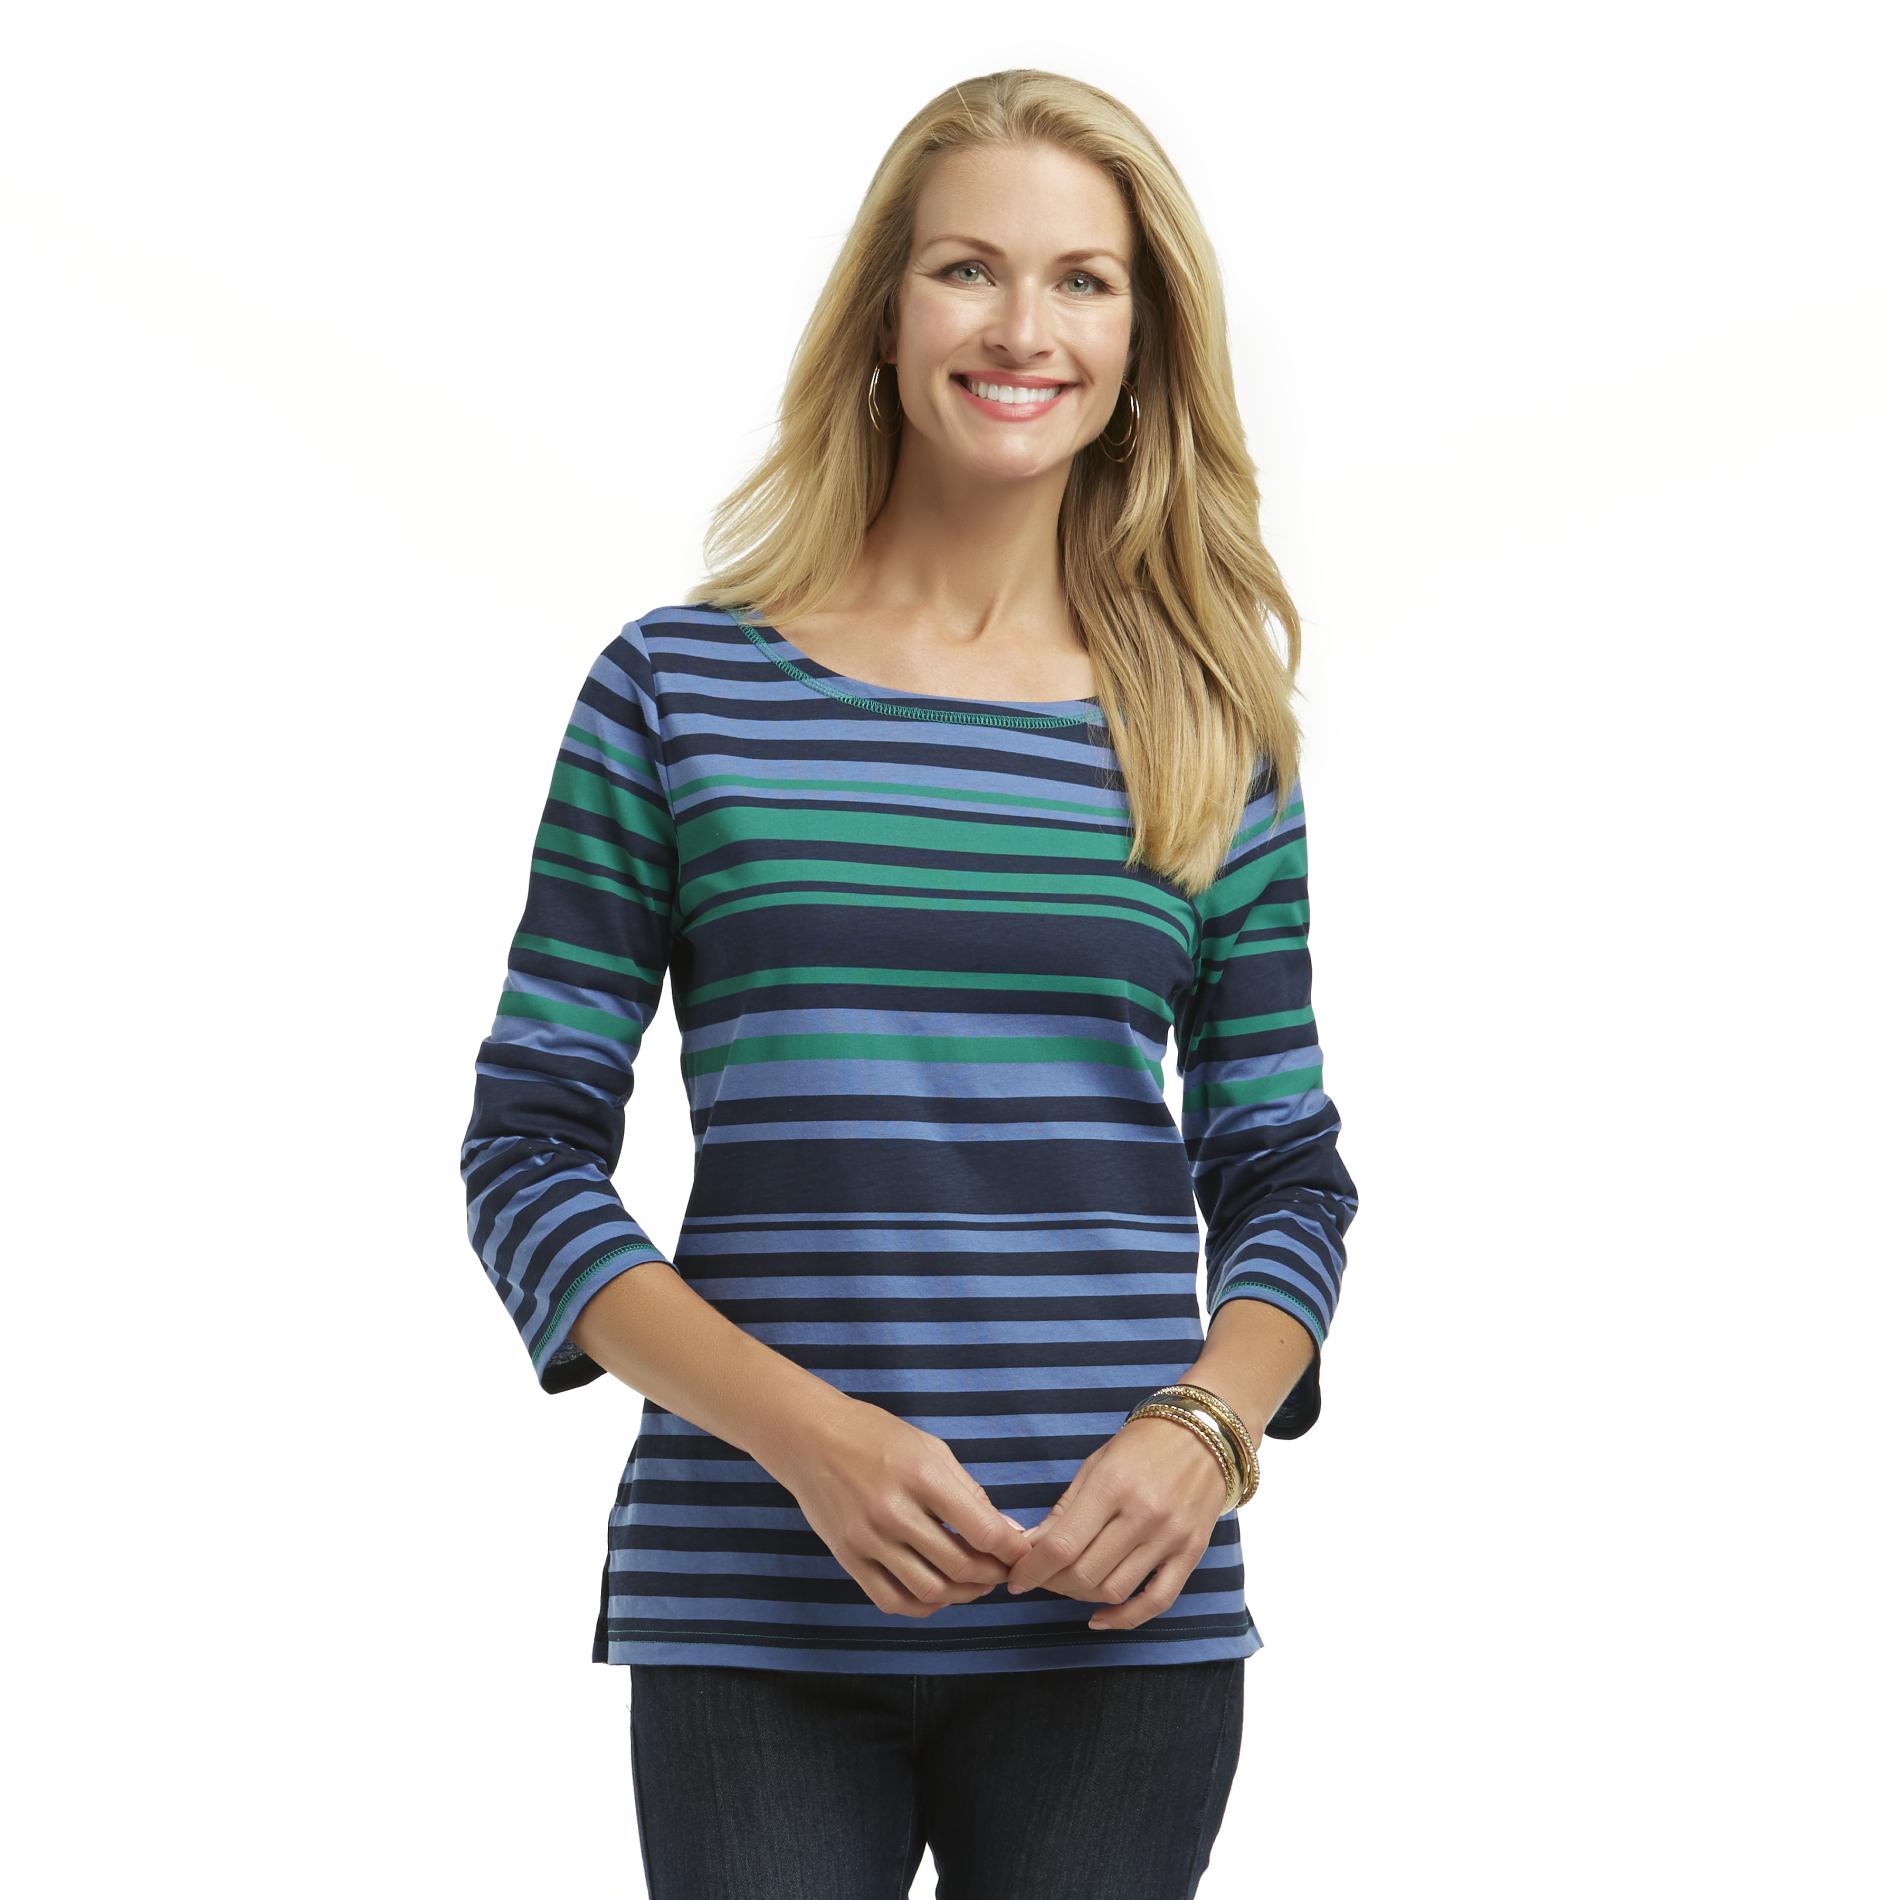 Basic Editions Women's Knit Top - Striped